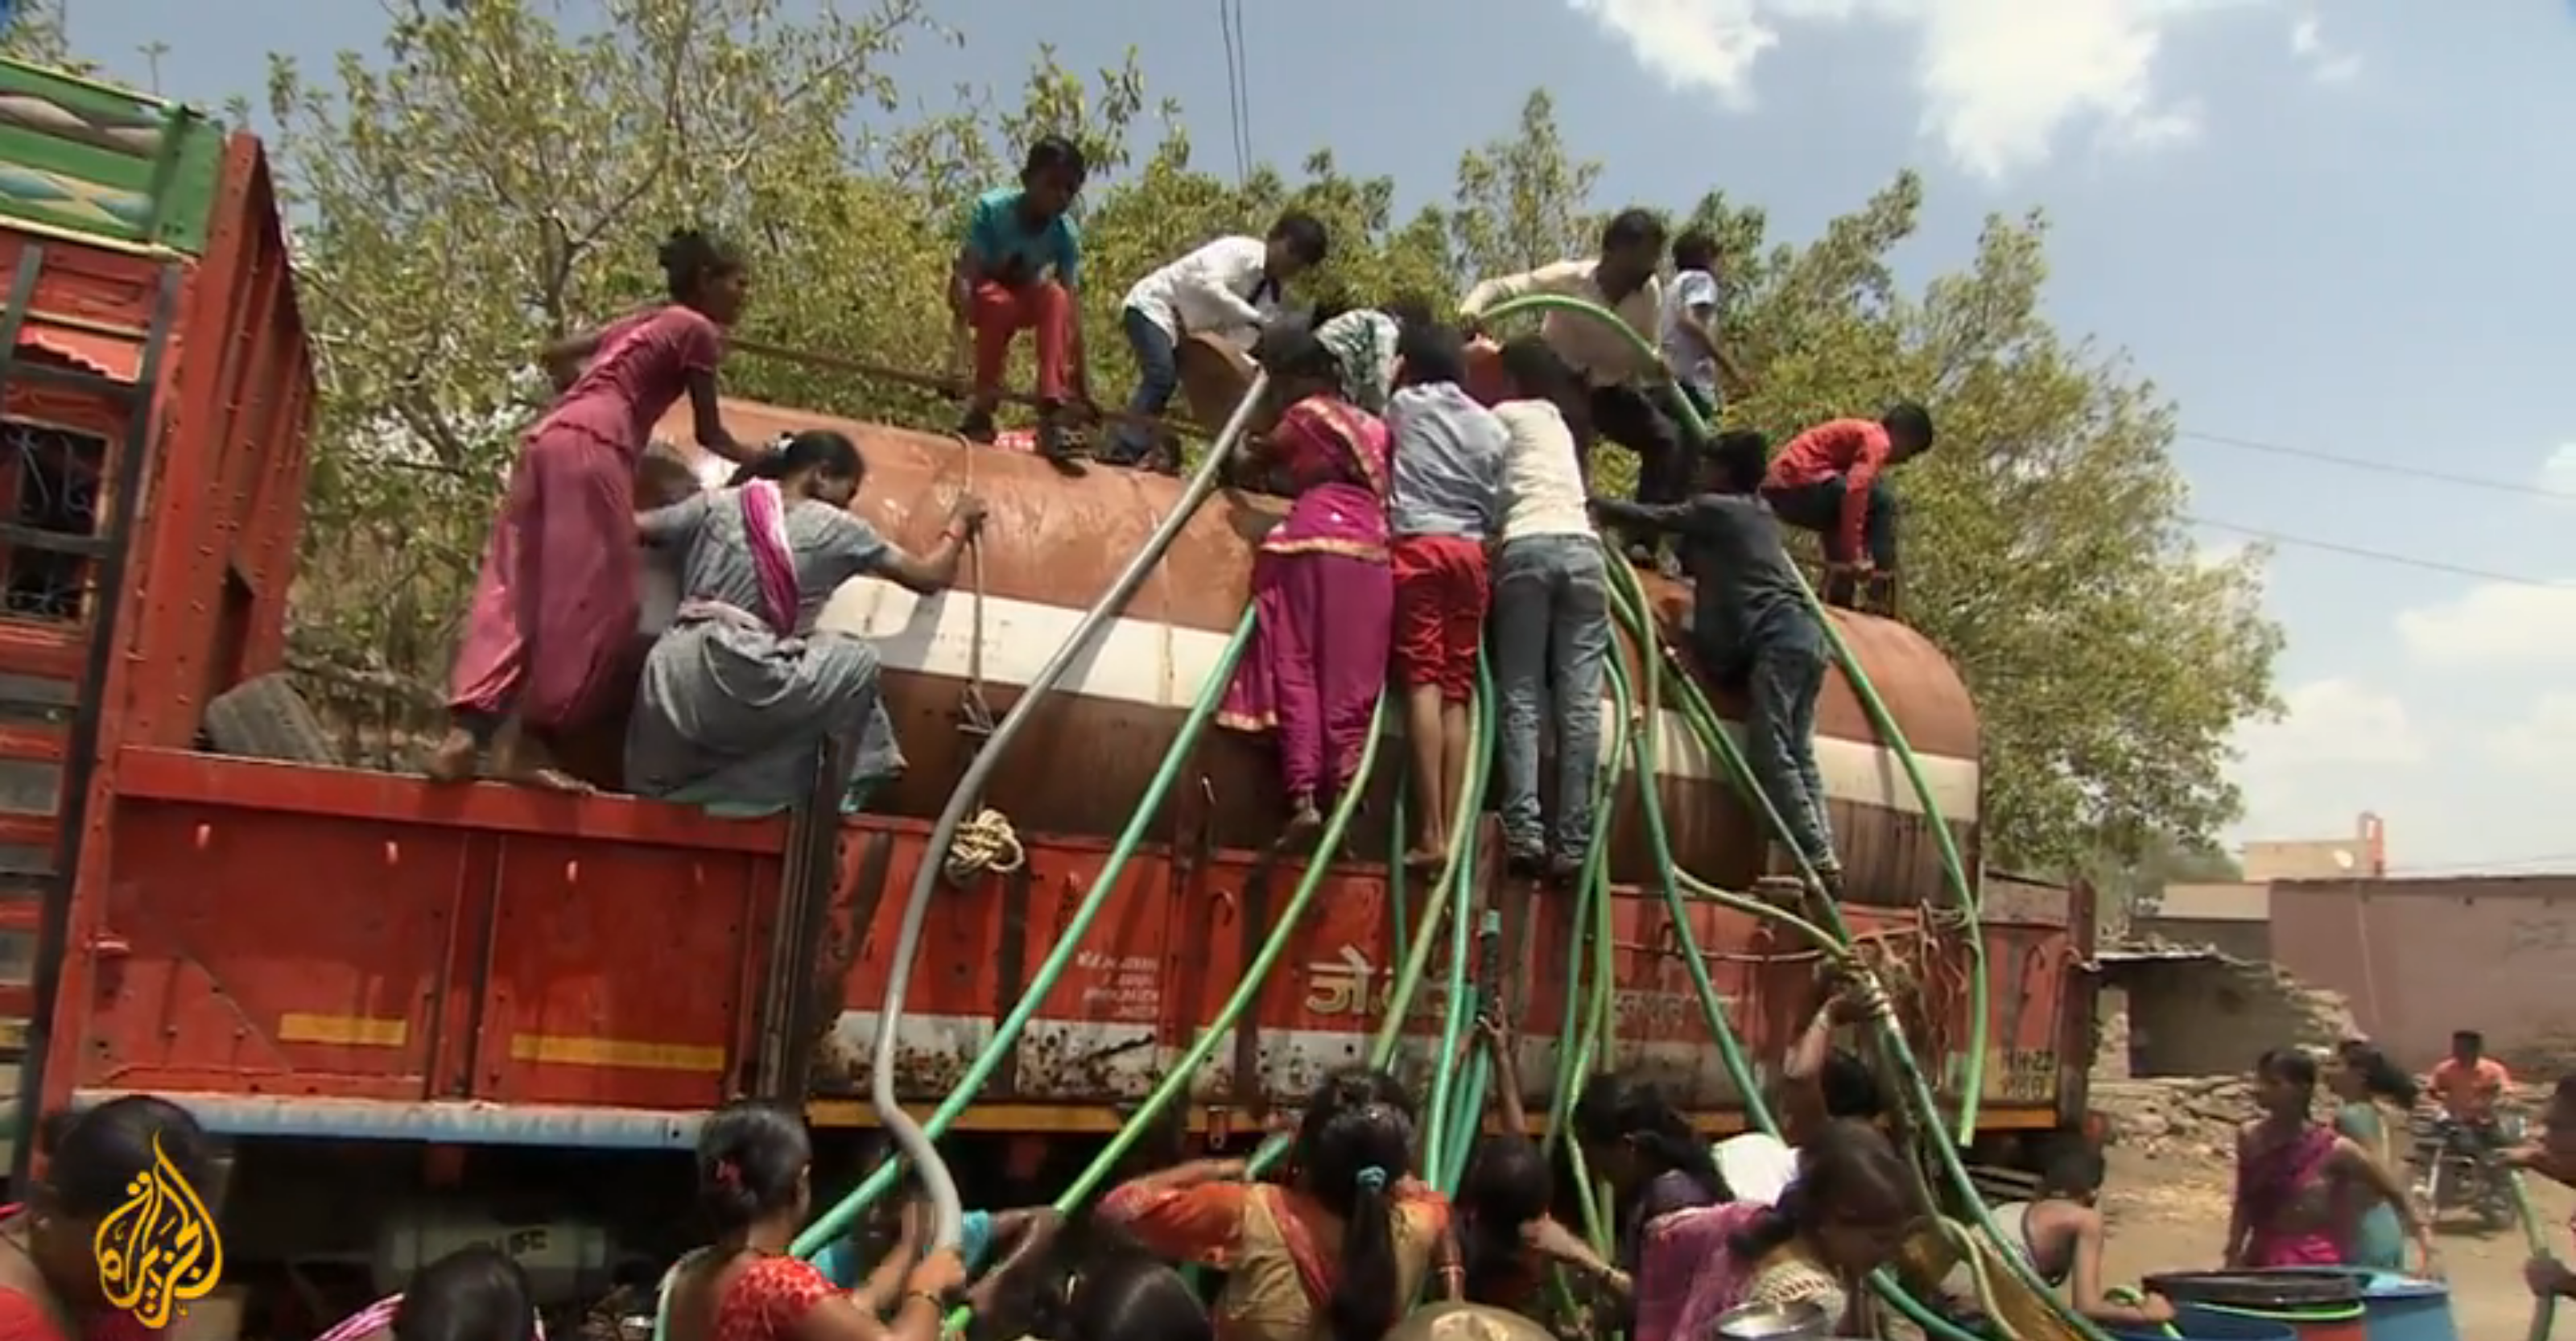 Villagers in Maharashtra state climb on a water truck to attach hoses for their daily water supply during India’s crippling drought of 2019. Photo: Al Jazeera